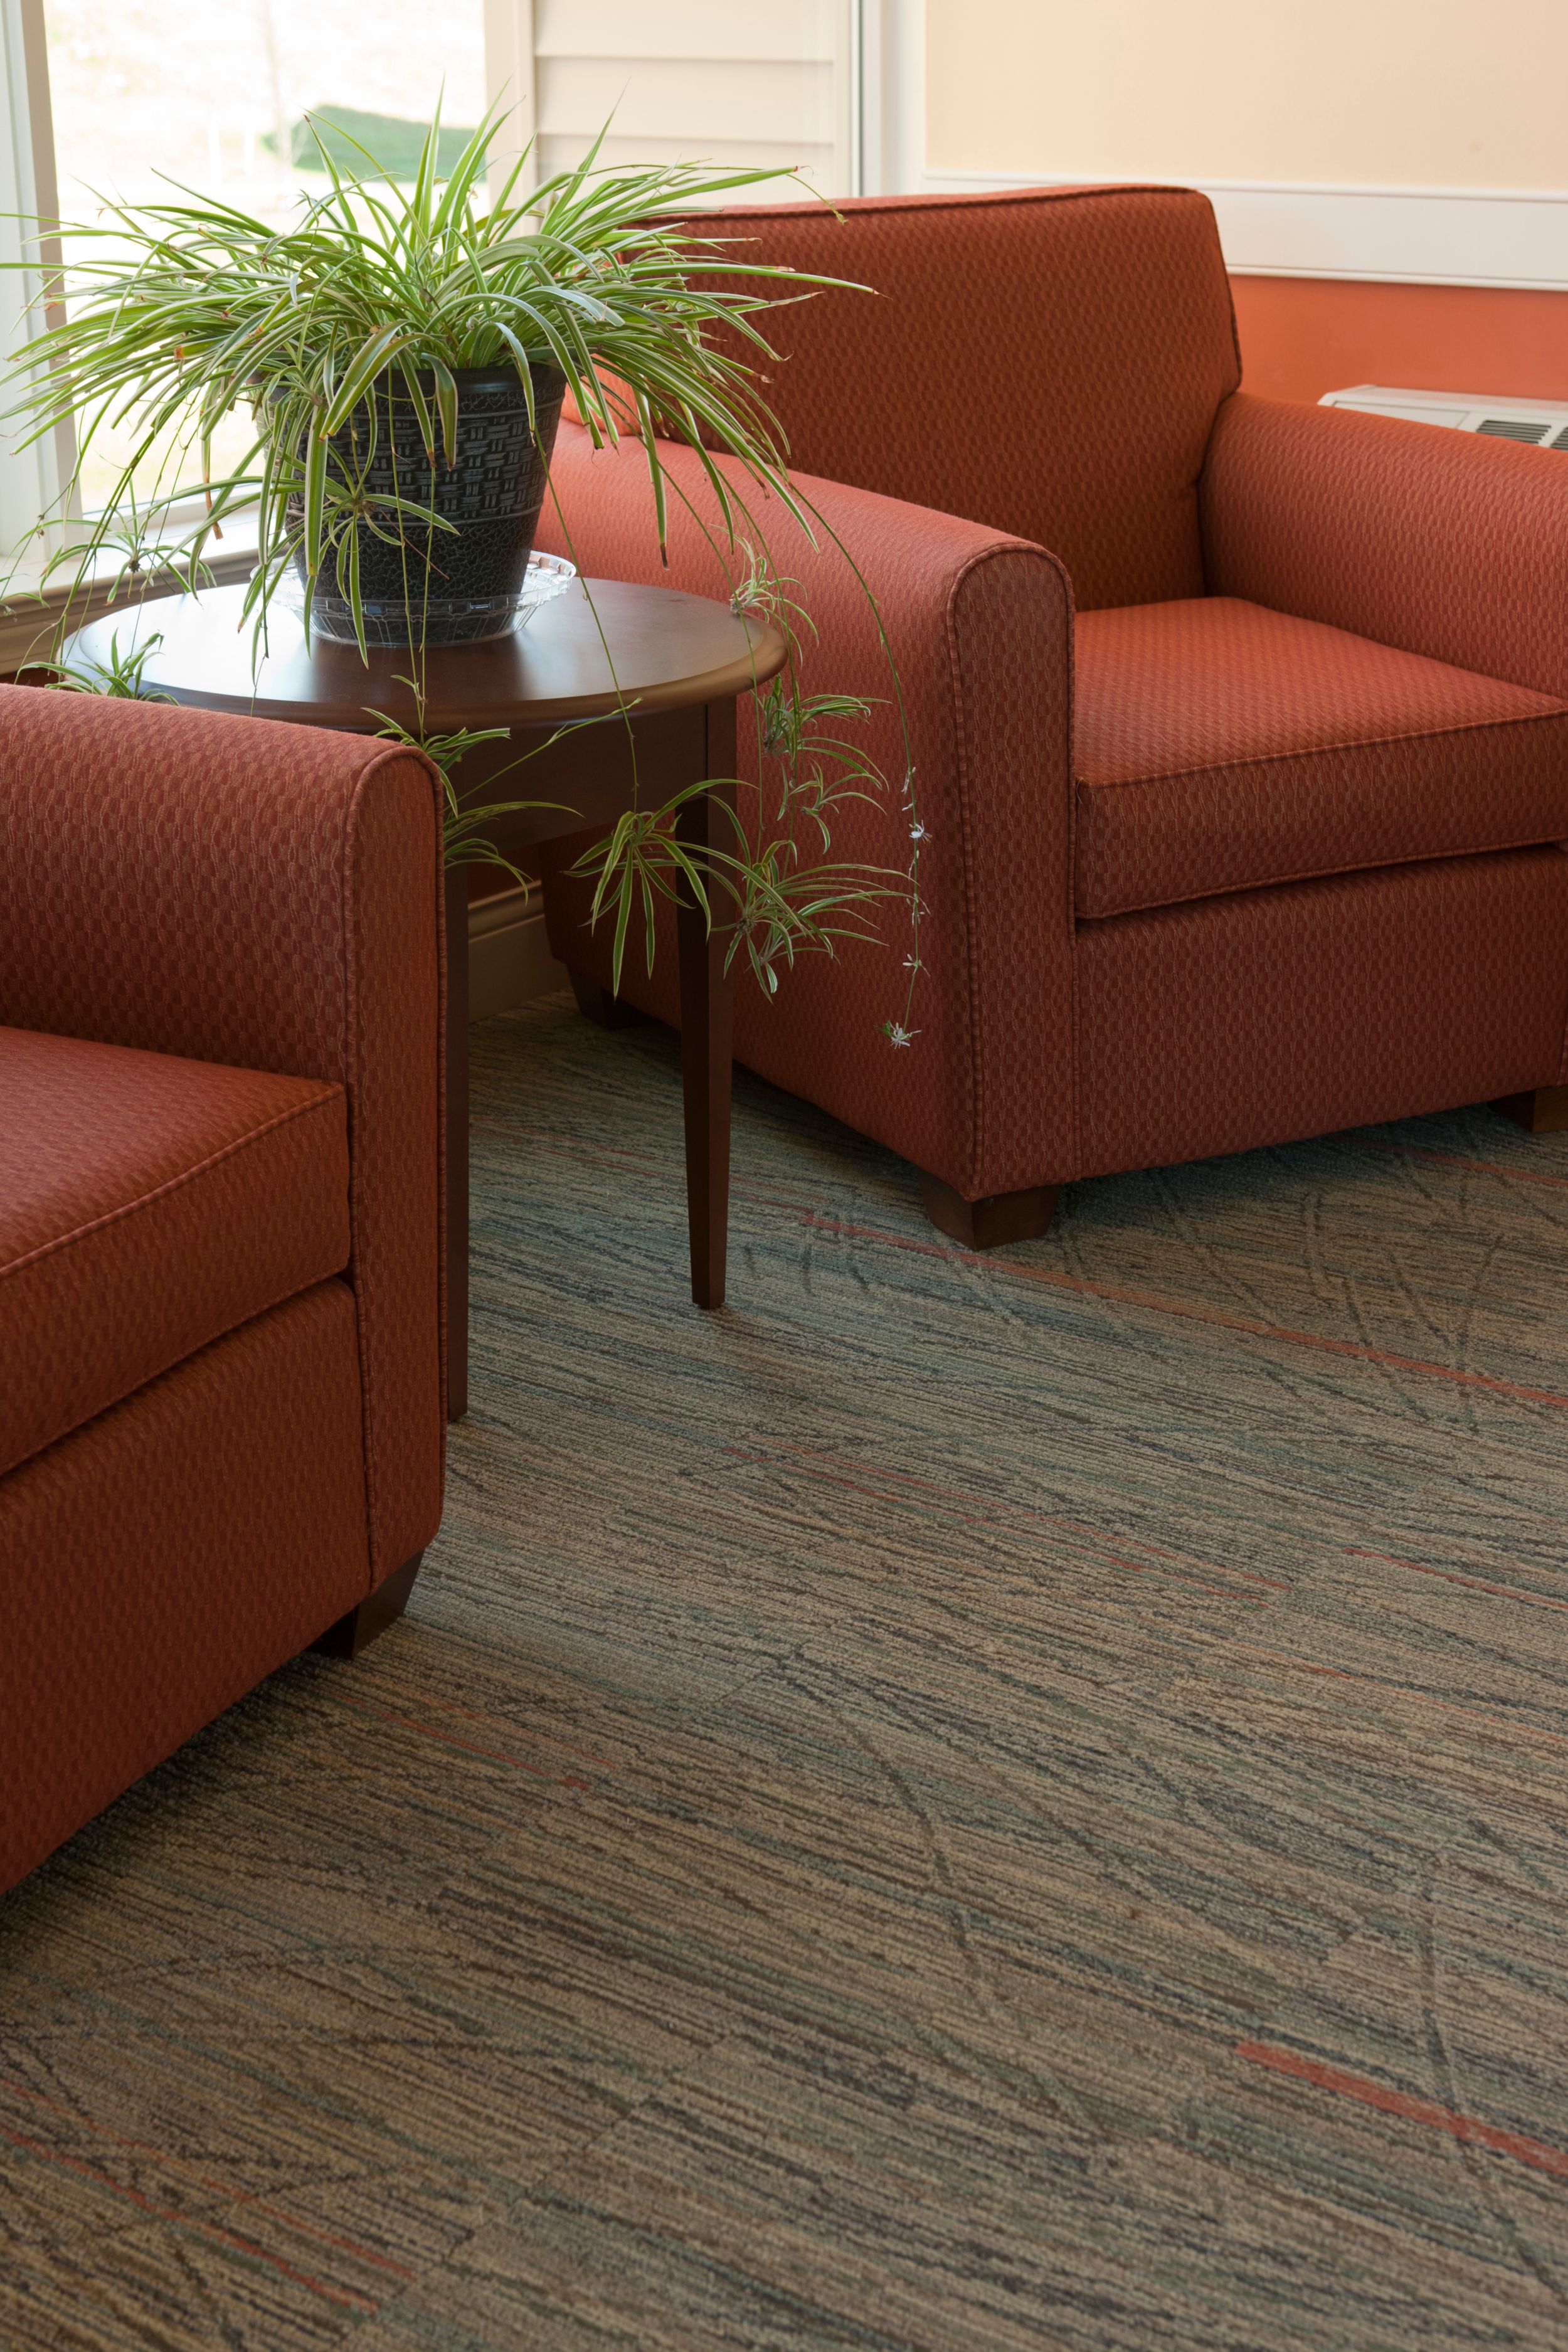 Detail of Interface Prairie Grass carpet tile in seating area with wood table and plant imagen número 9